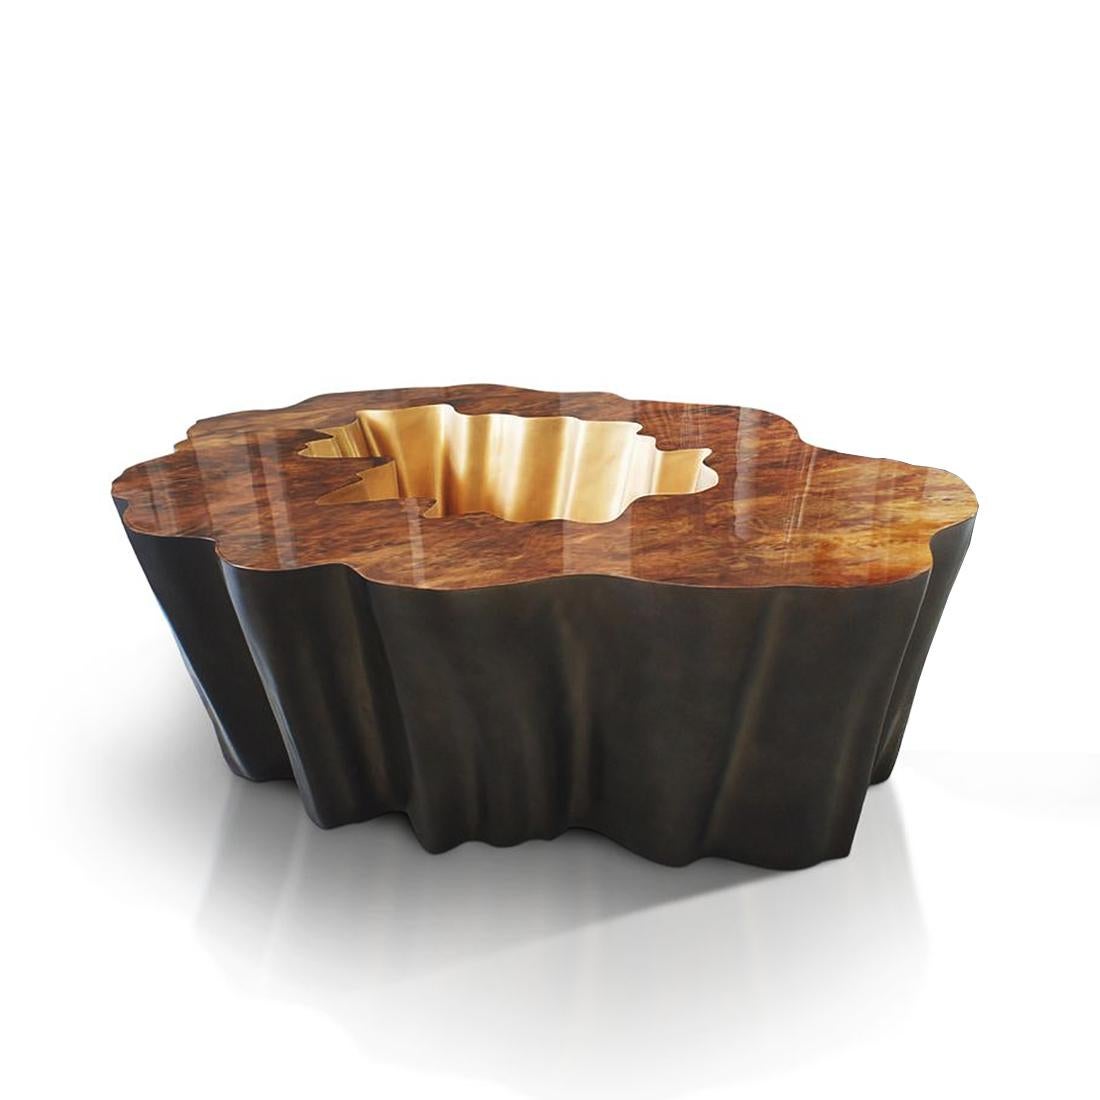 Coffee table Cesar dark with fiber glass base in dark
matte finish and with top in walnut wood. With carved
clear glass top.